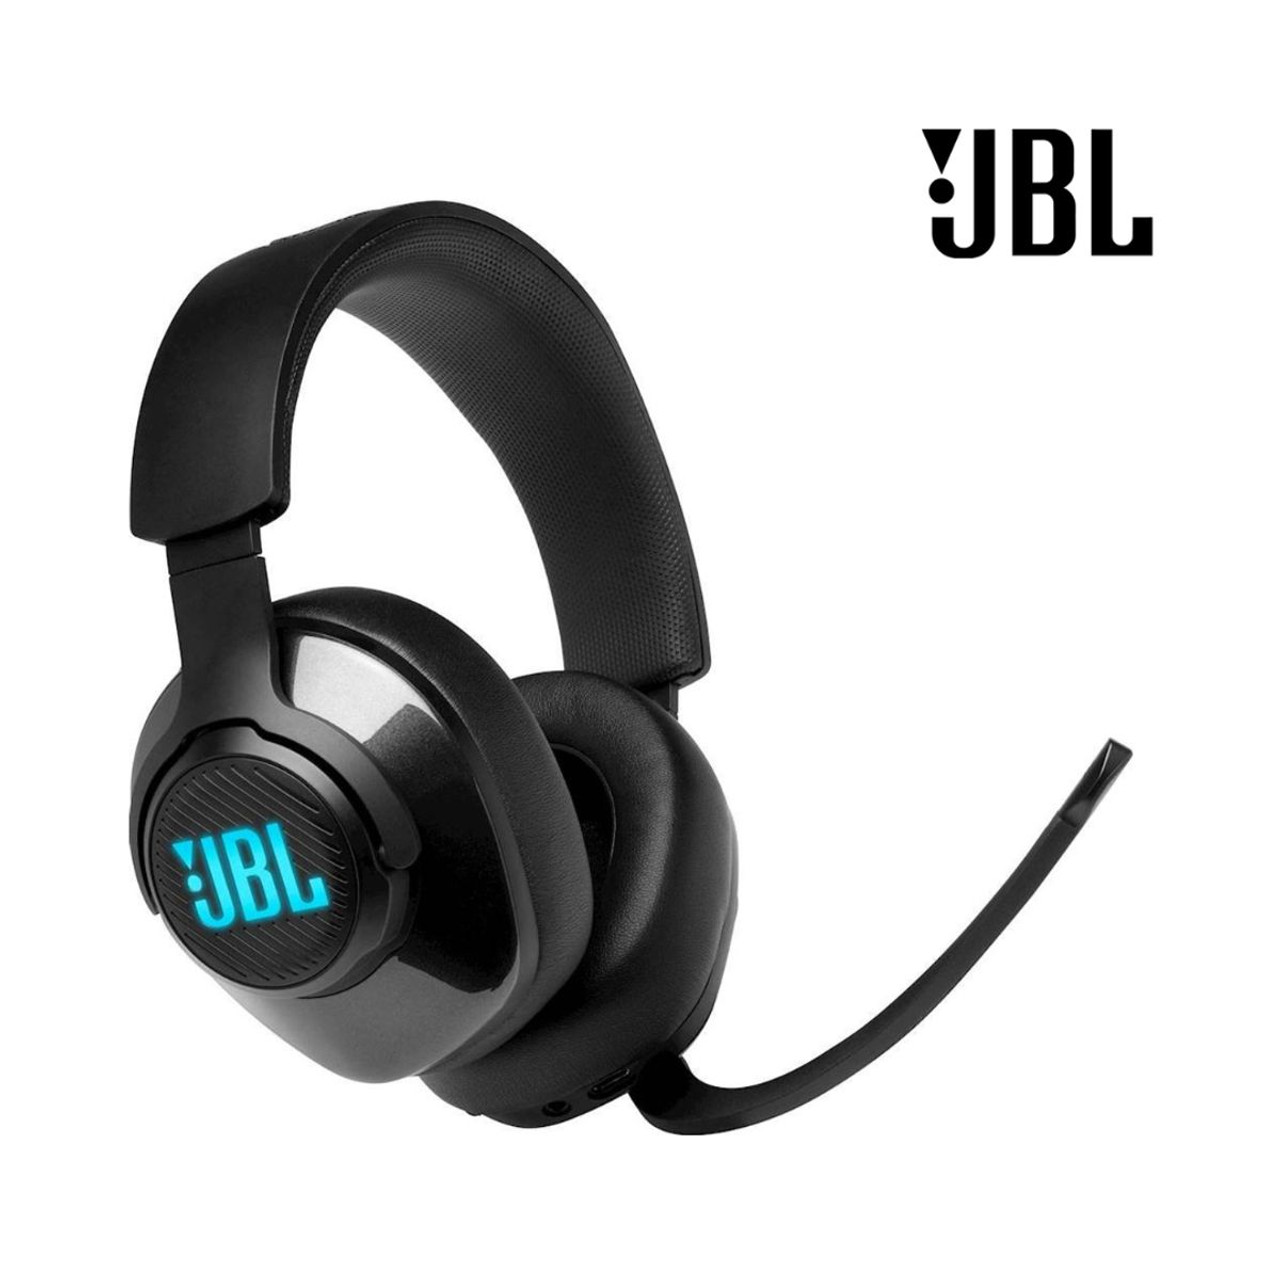 JBL Quantum 400 Gaming Wired Headphones product image